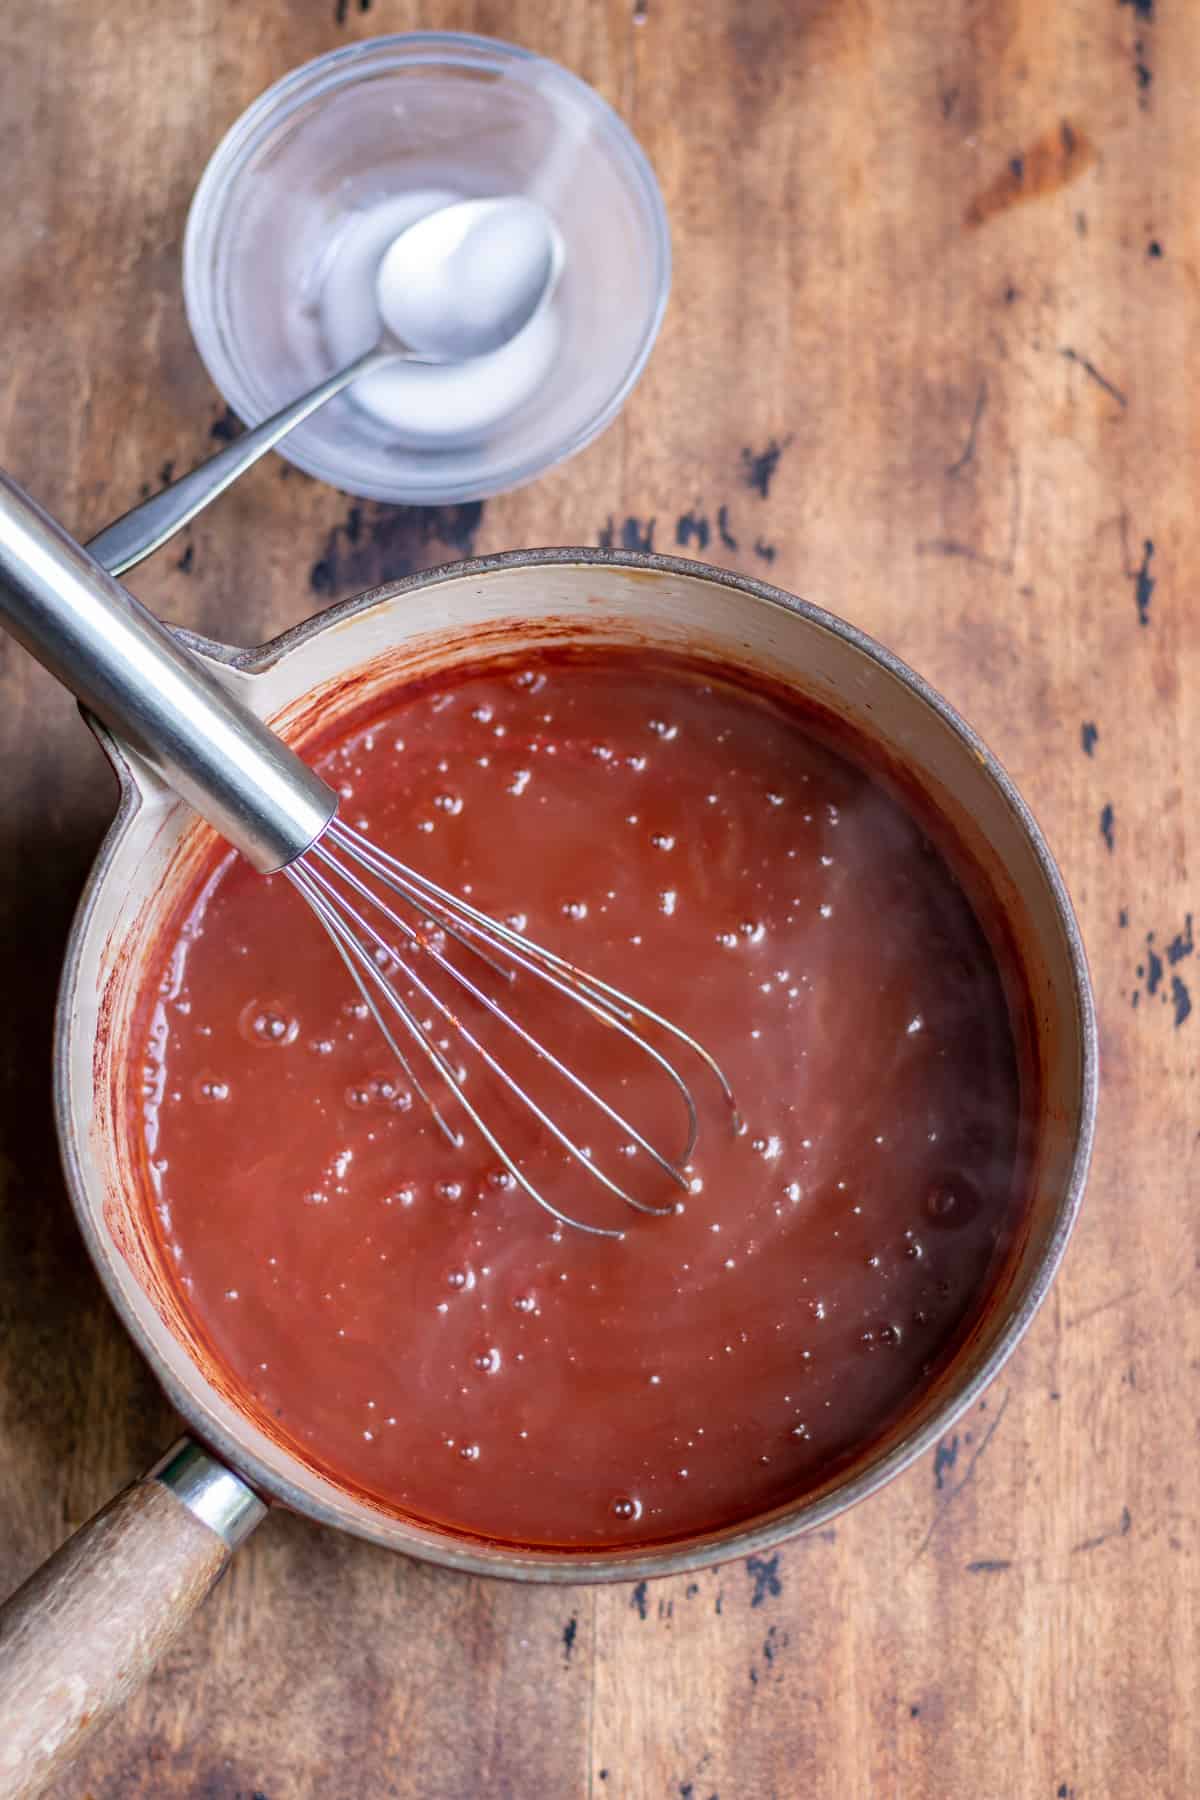 Whisking the cornstarch into the sauce.